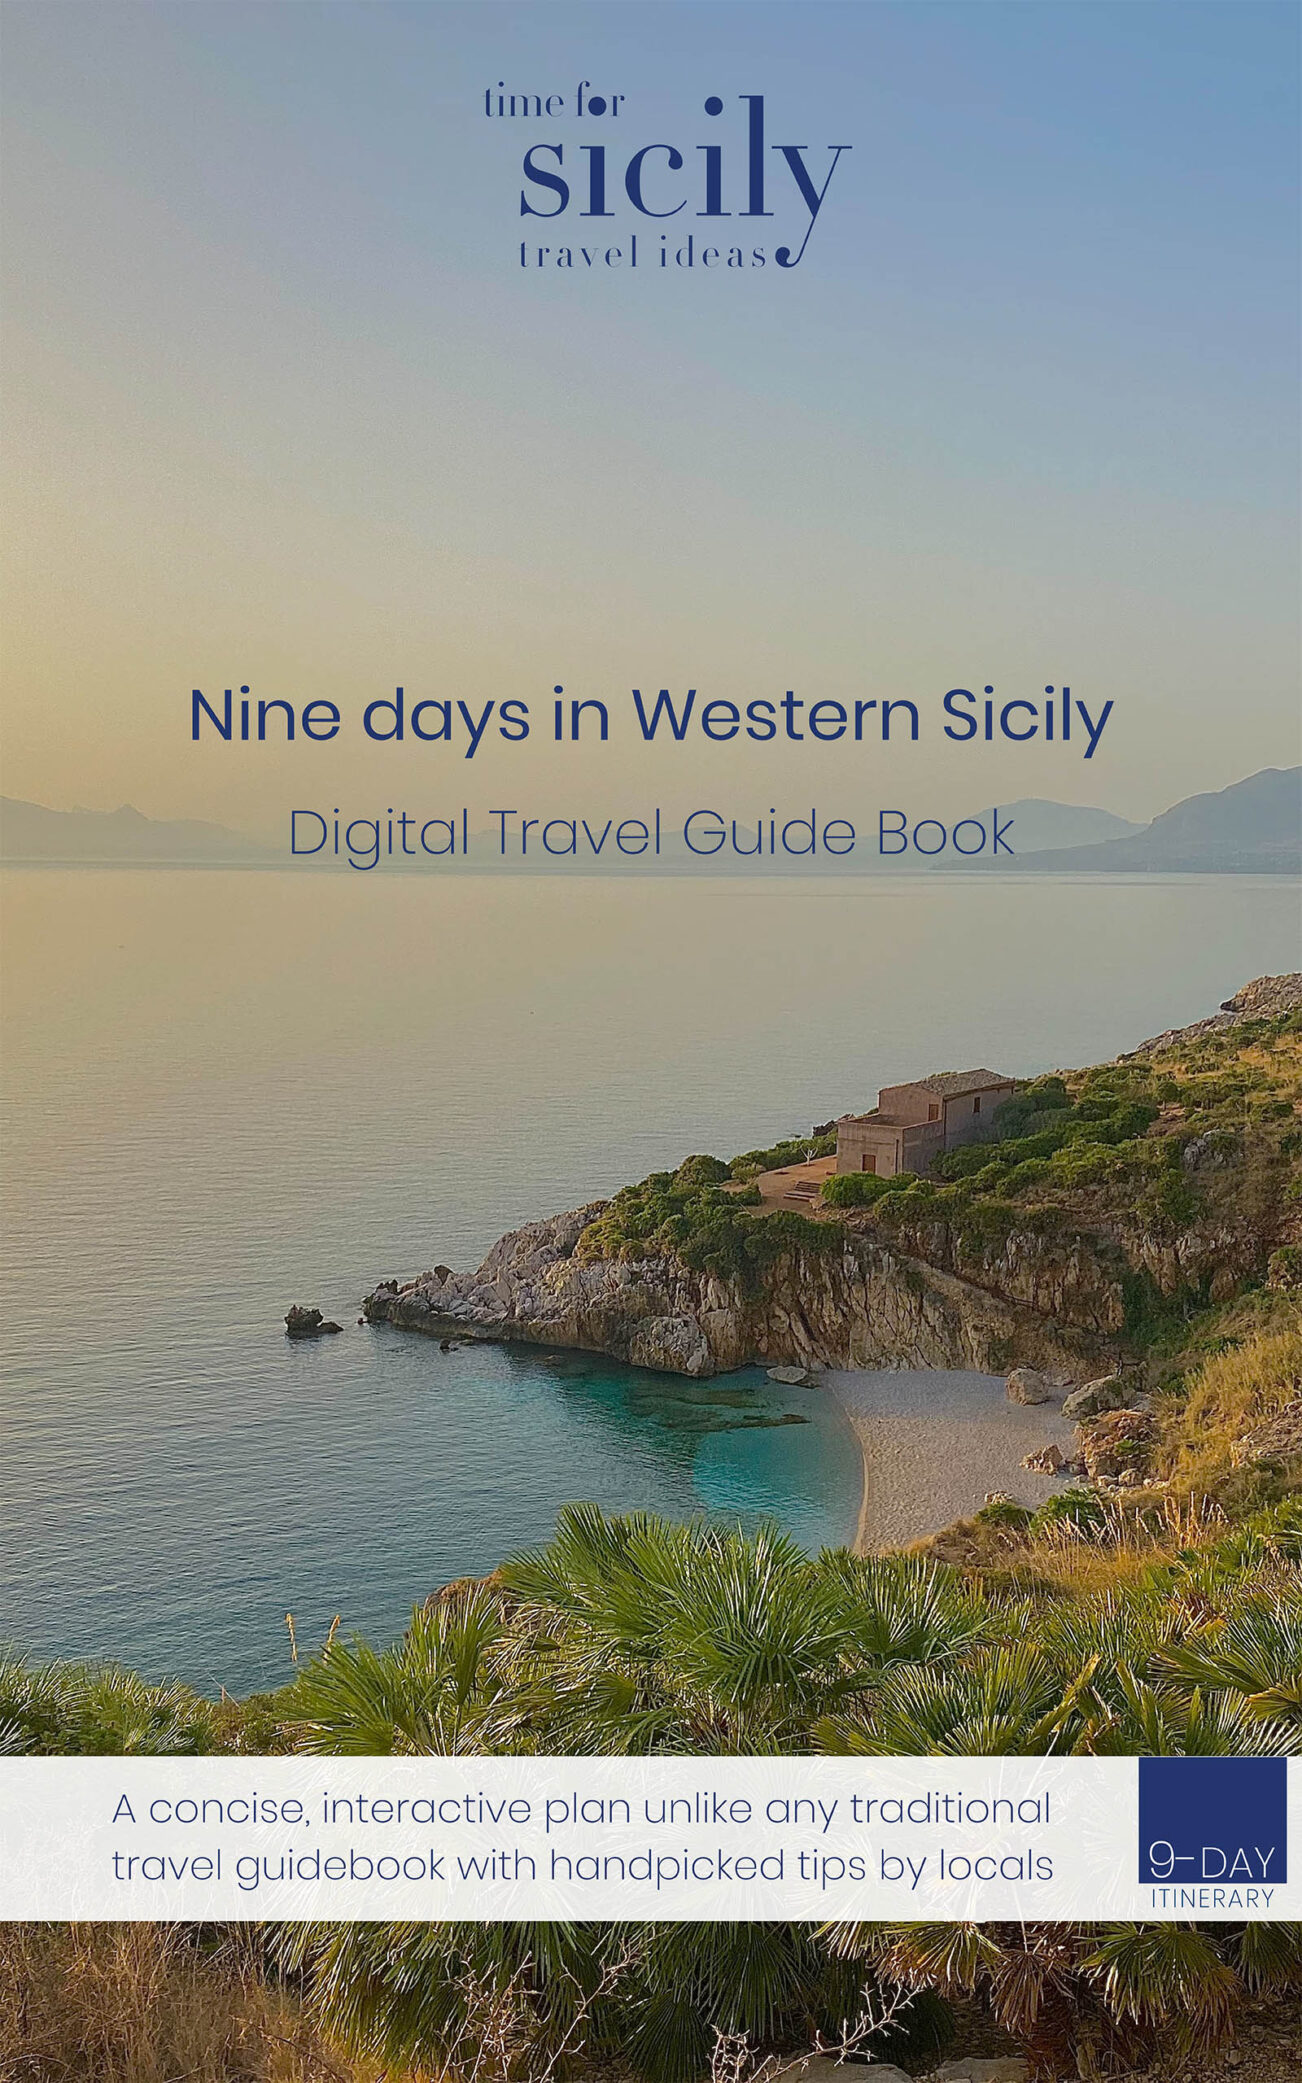 Shop Our Sicily Travel Guide Book - Time for Sicily